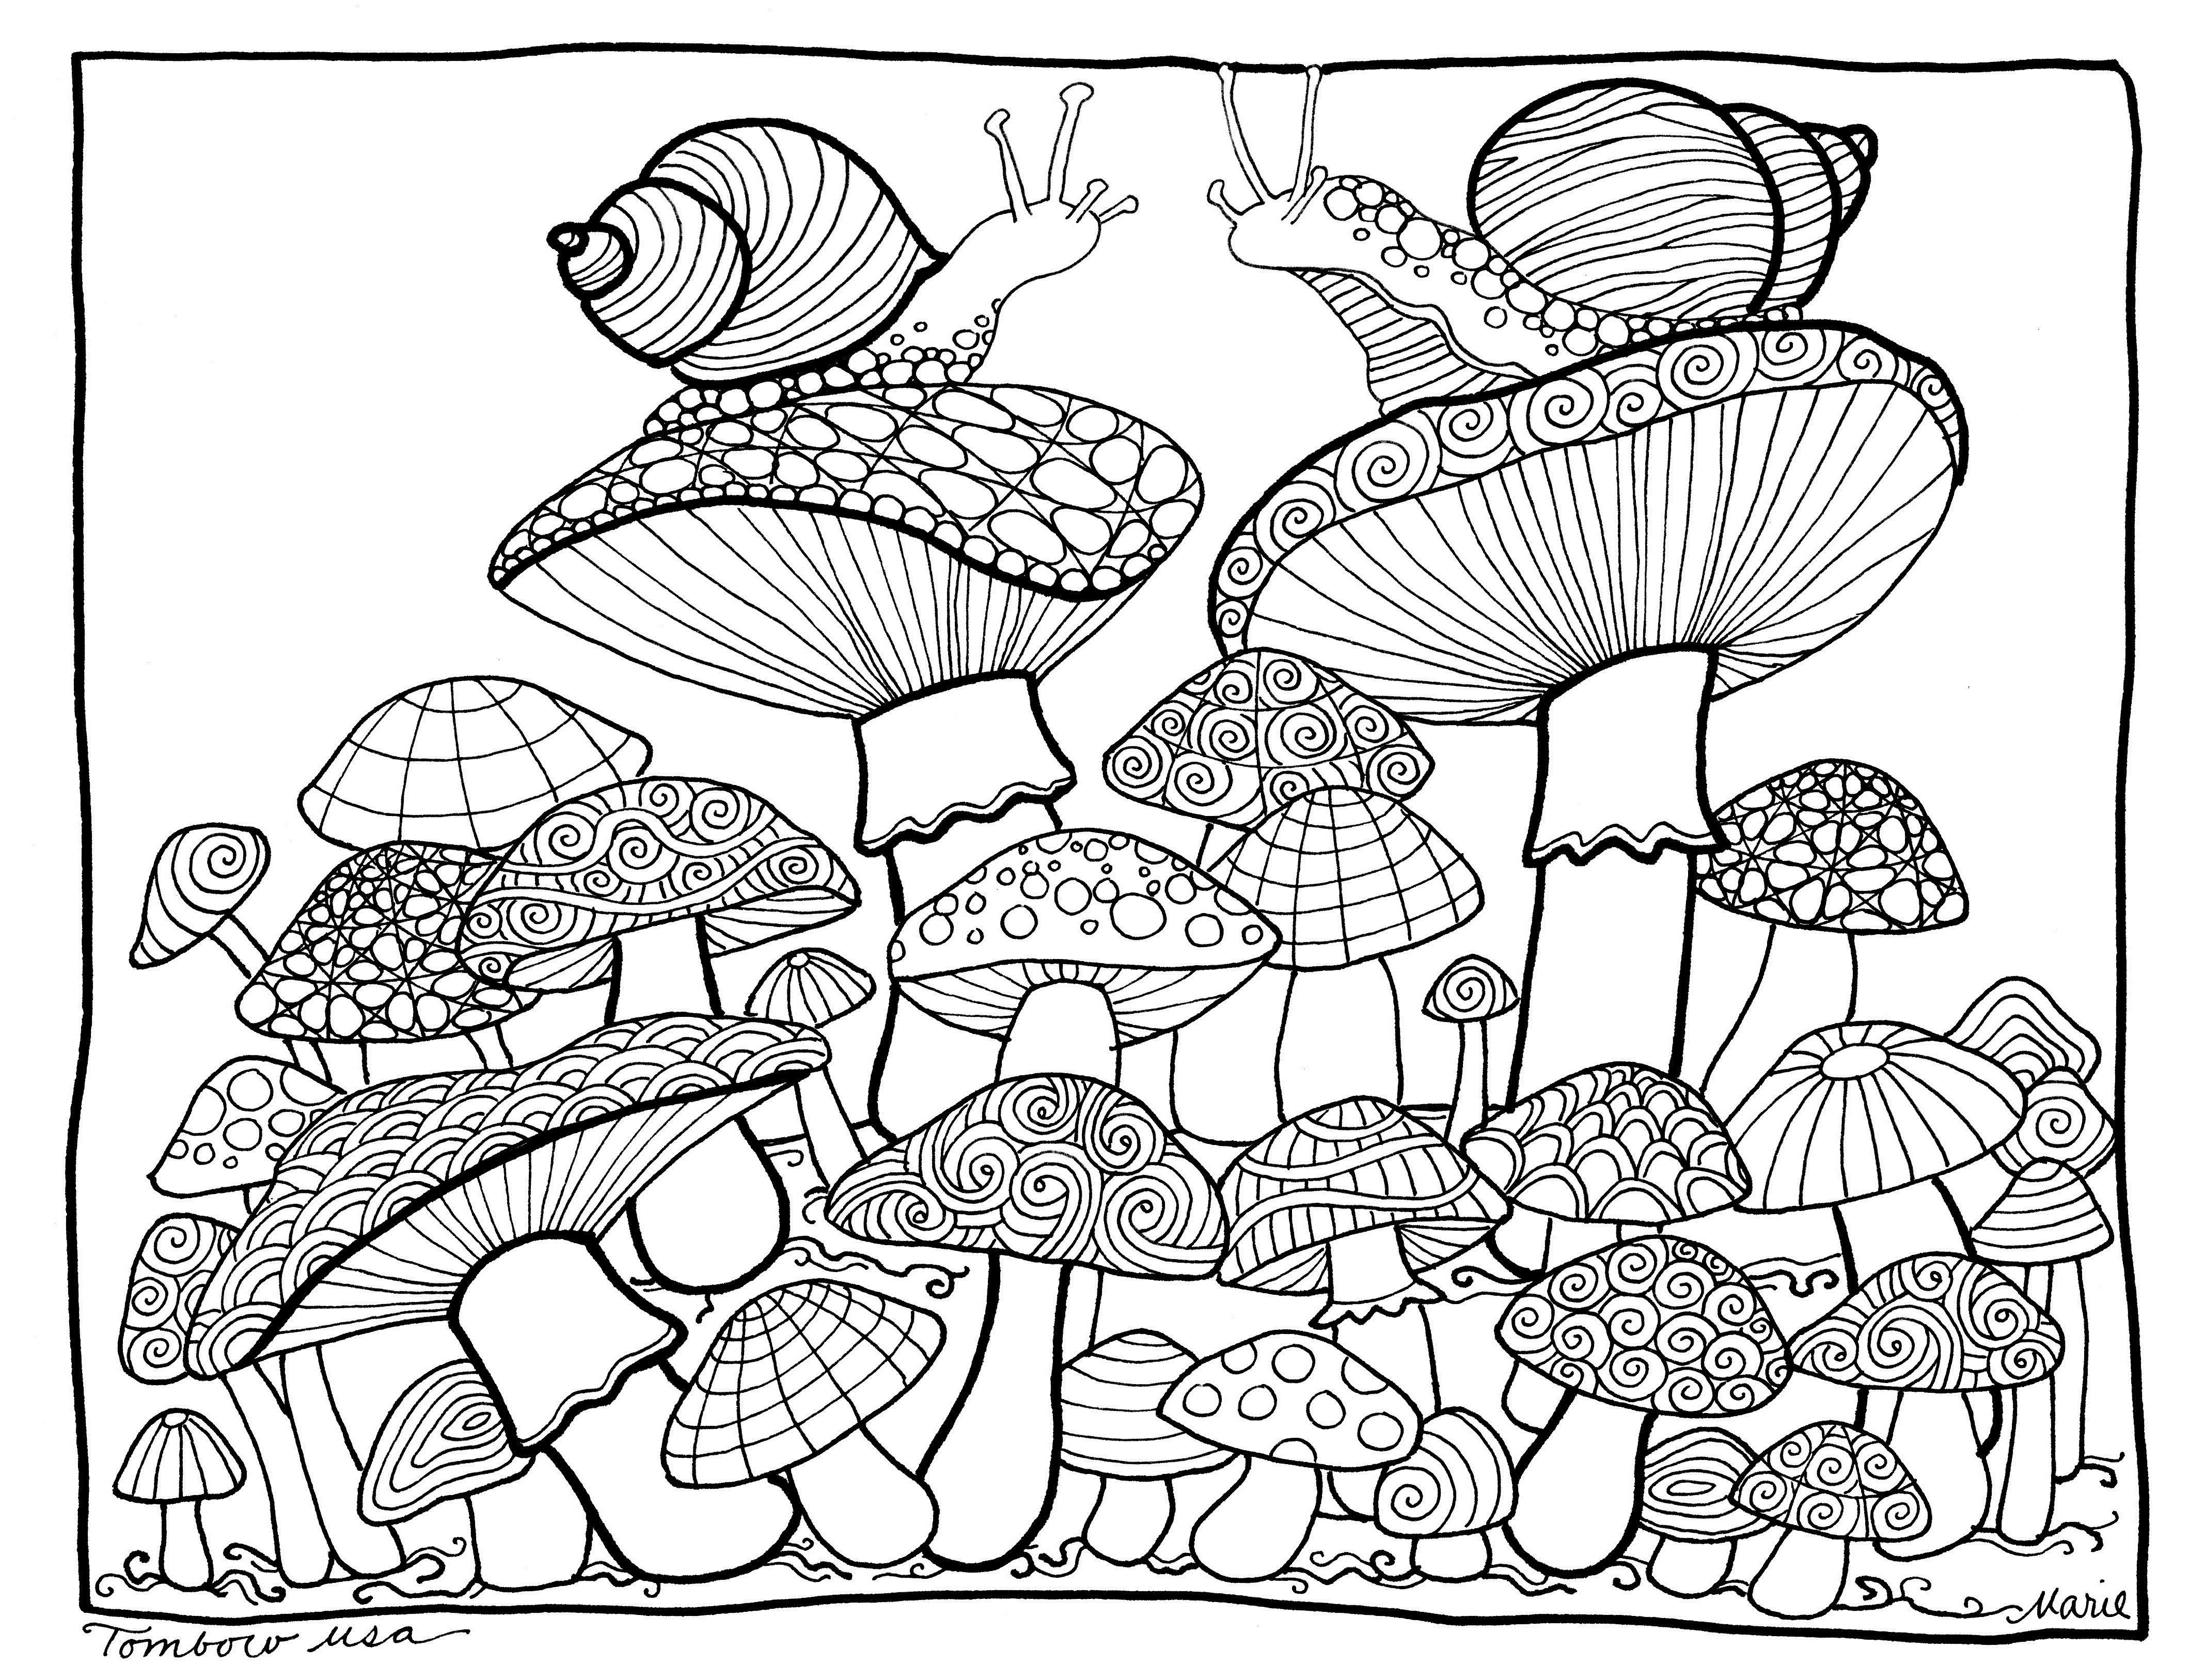 Mushrooms Coloring Page By Tombow USA   Adult Coloring Pages ...